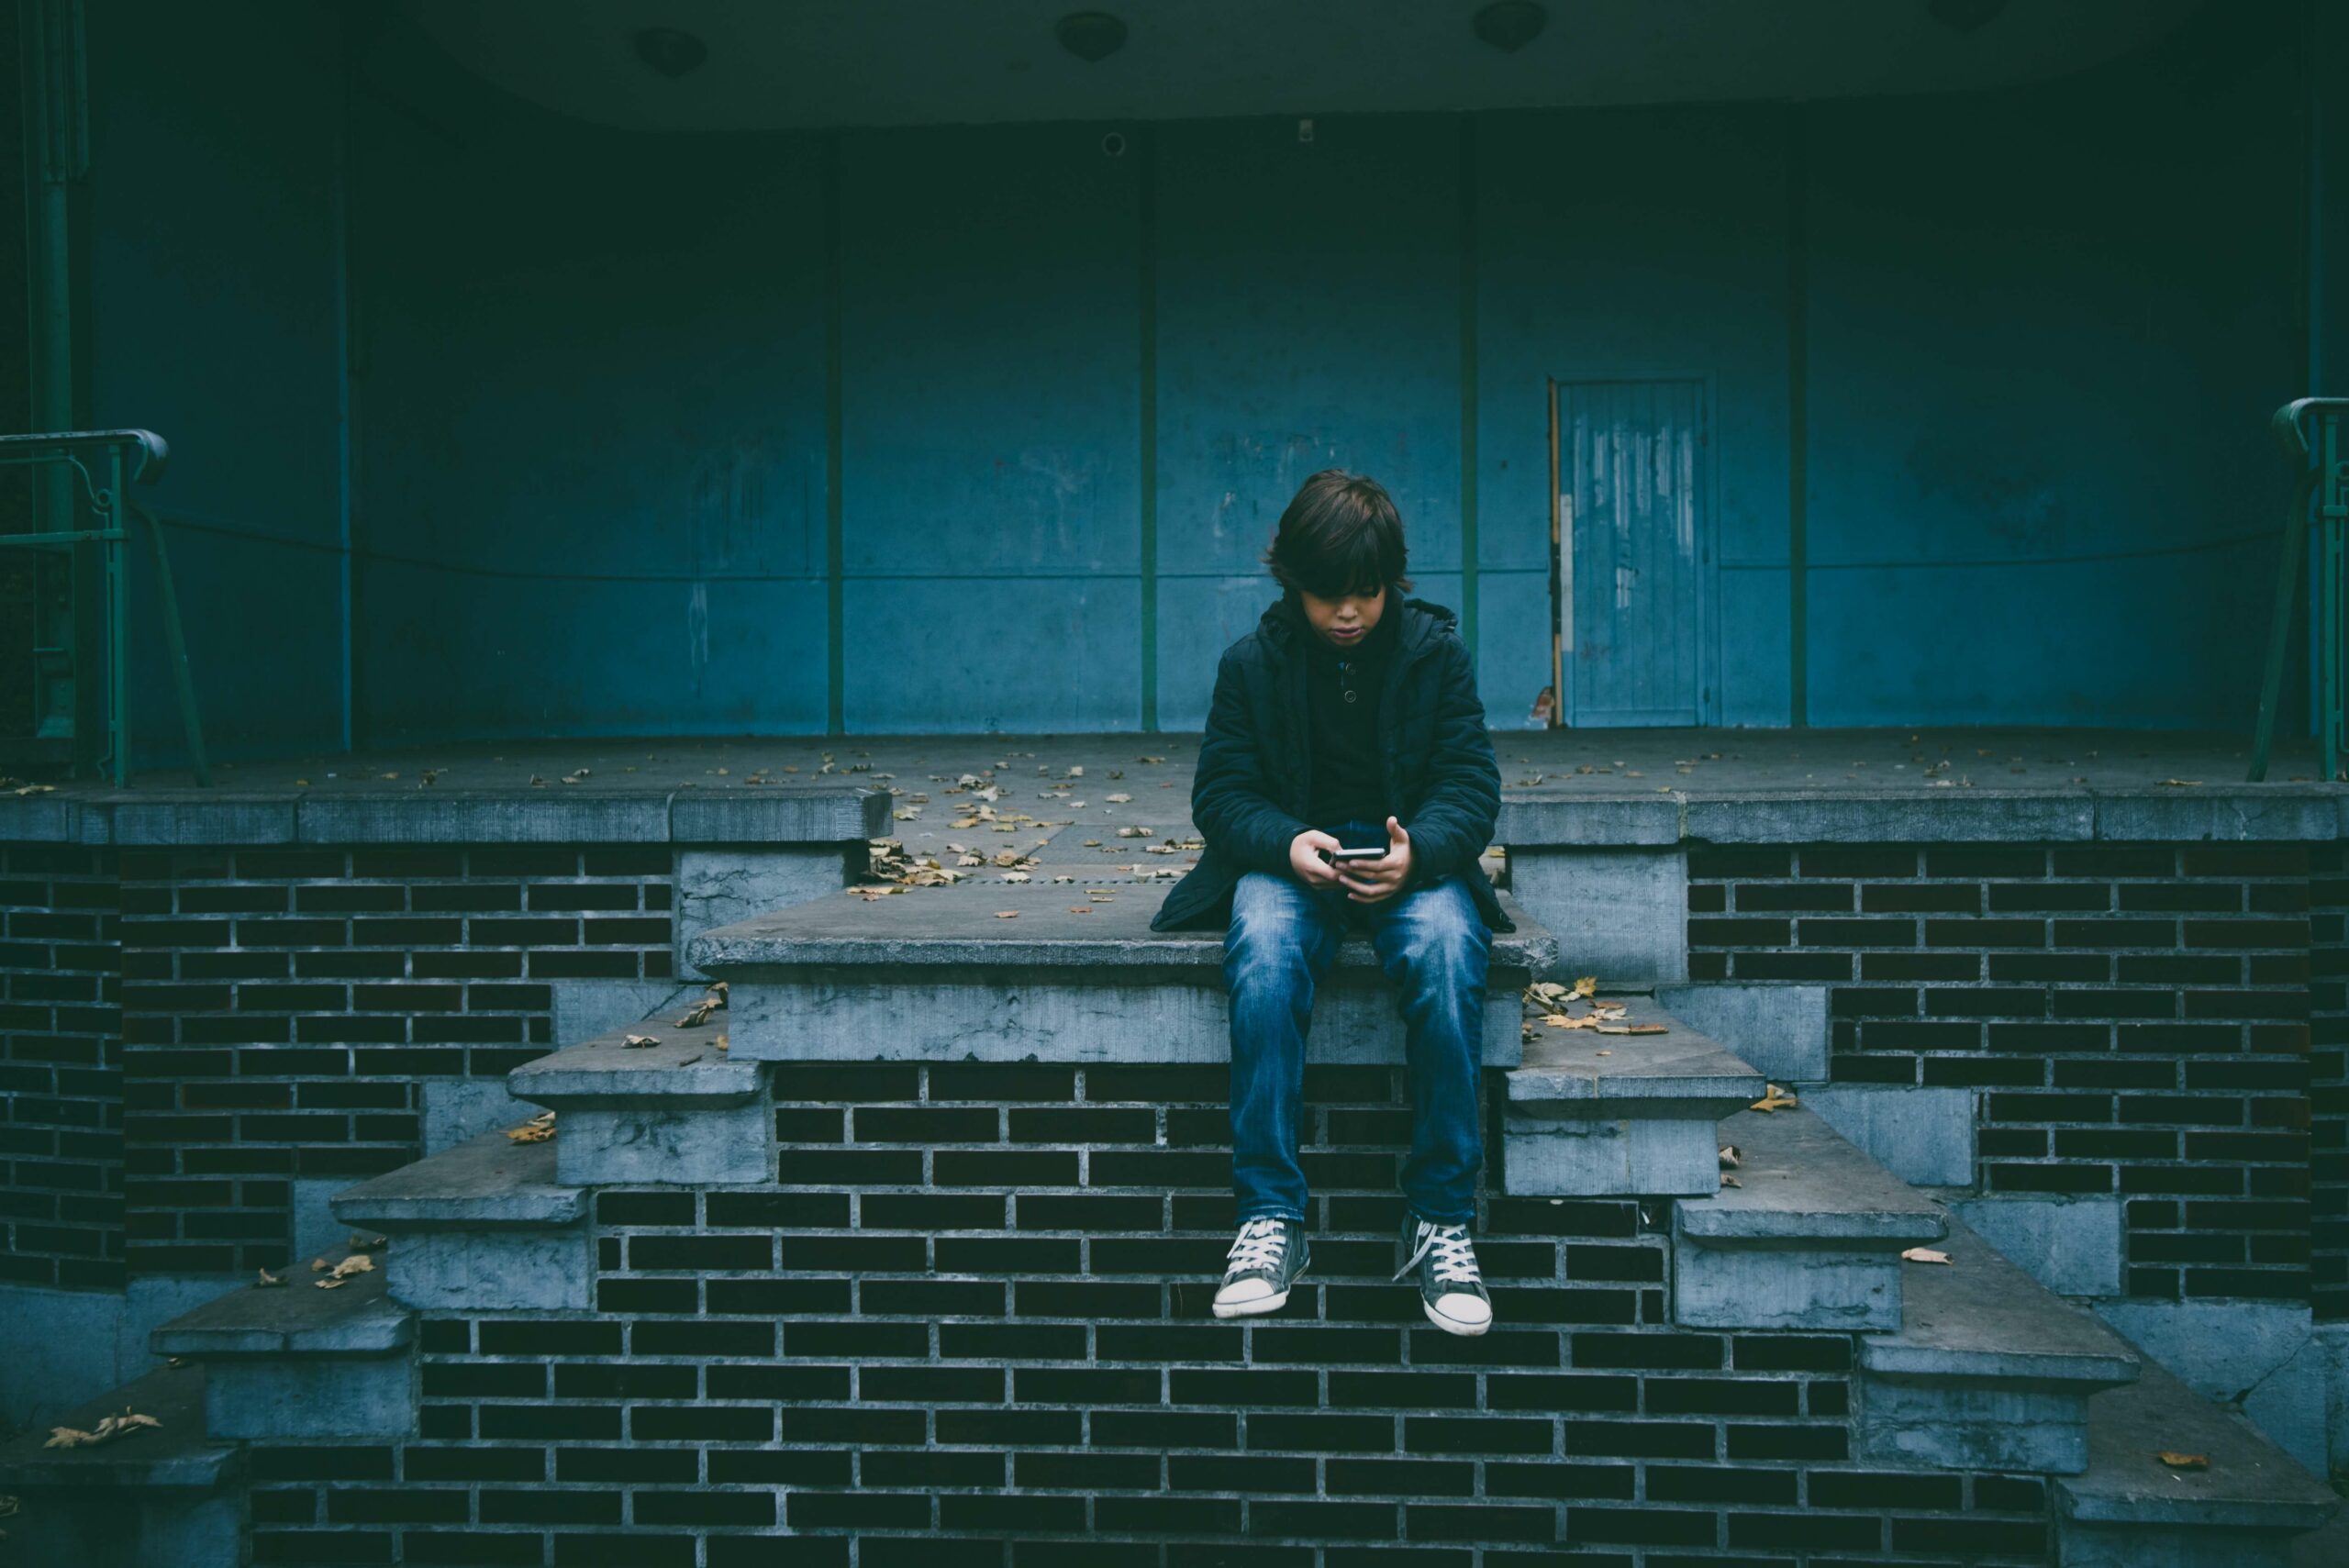 Young teenage boy sits on brick steps and looks down at a cellphone in his hand.